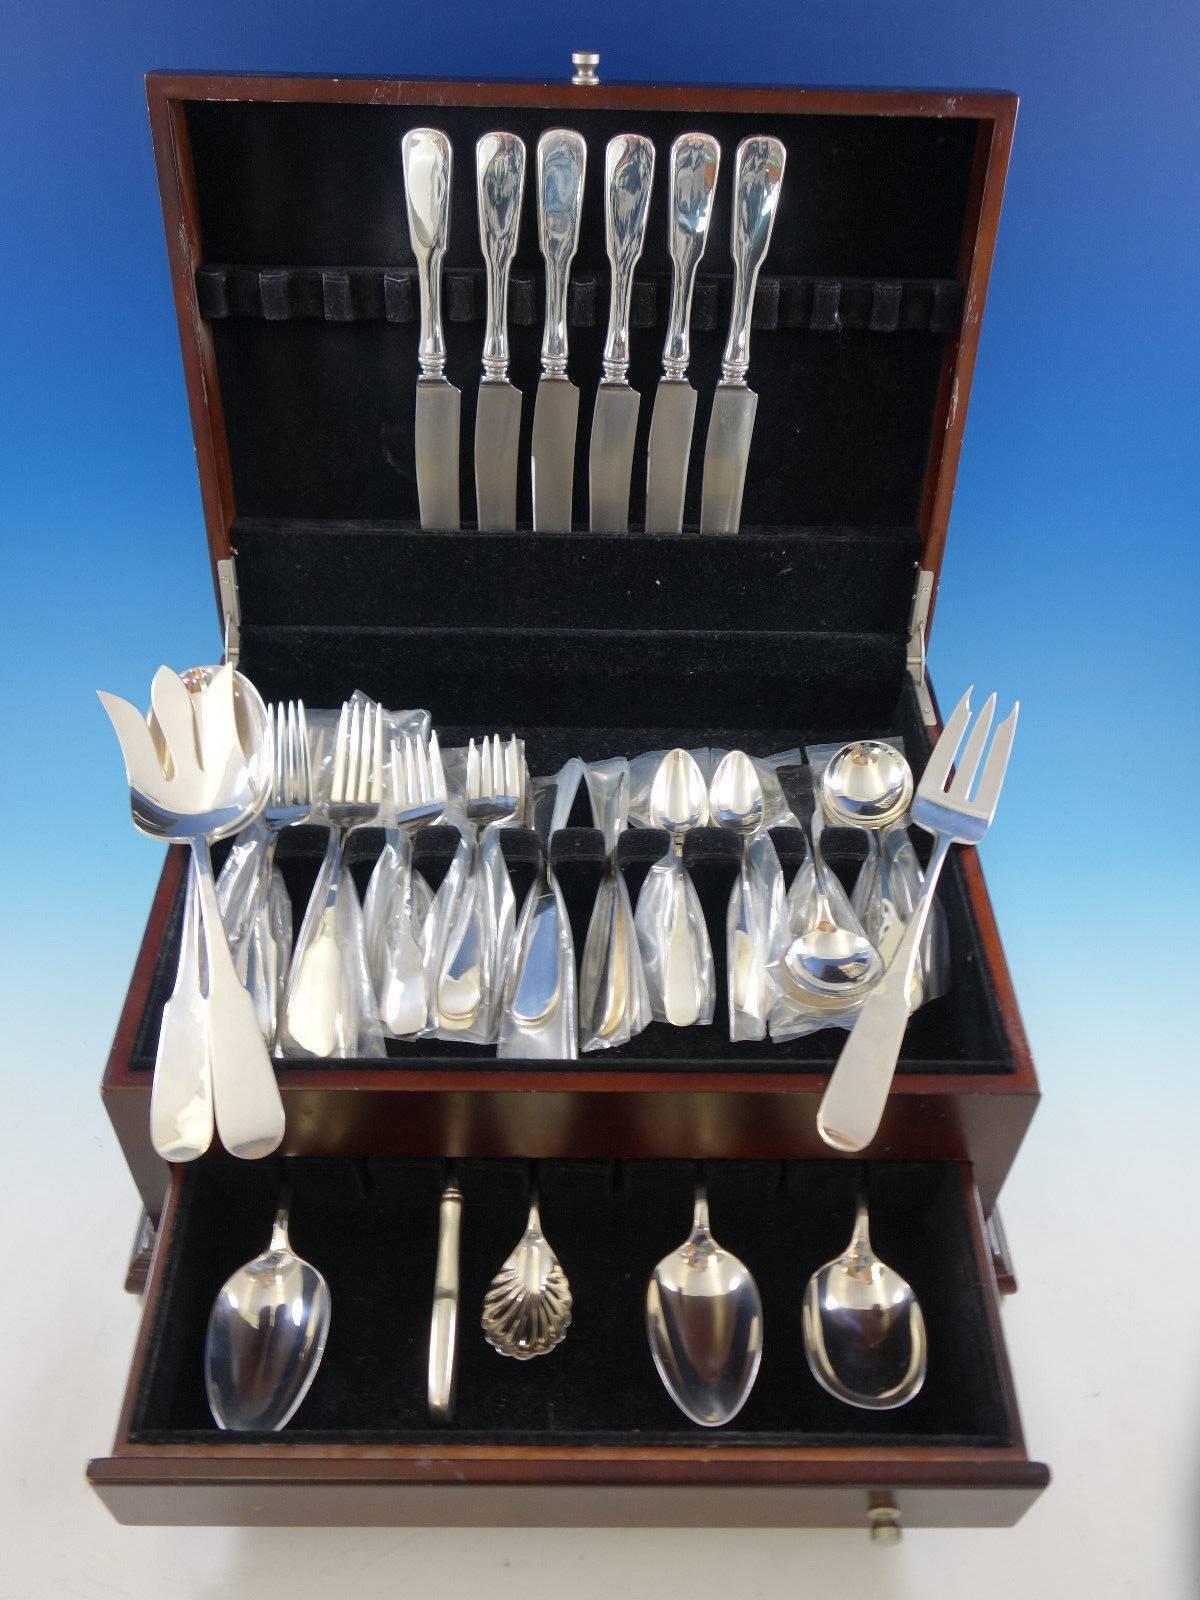 Moulton by Old Newbury Crafters sterling silver flatware set, 44 pieces. This set includes: six knives, 8 7/8" (Sturbridge by Onc), six dinner forks, 7 7/8", six salad forks, 6 3/4", six teaspoons, 5 7/8", six cream soup spoons,